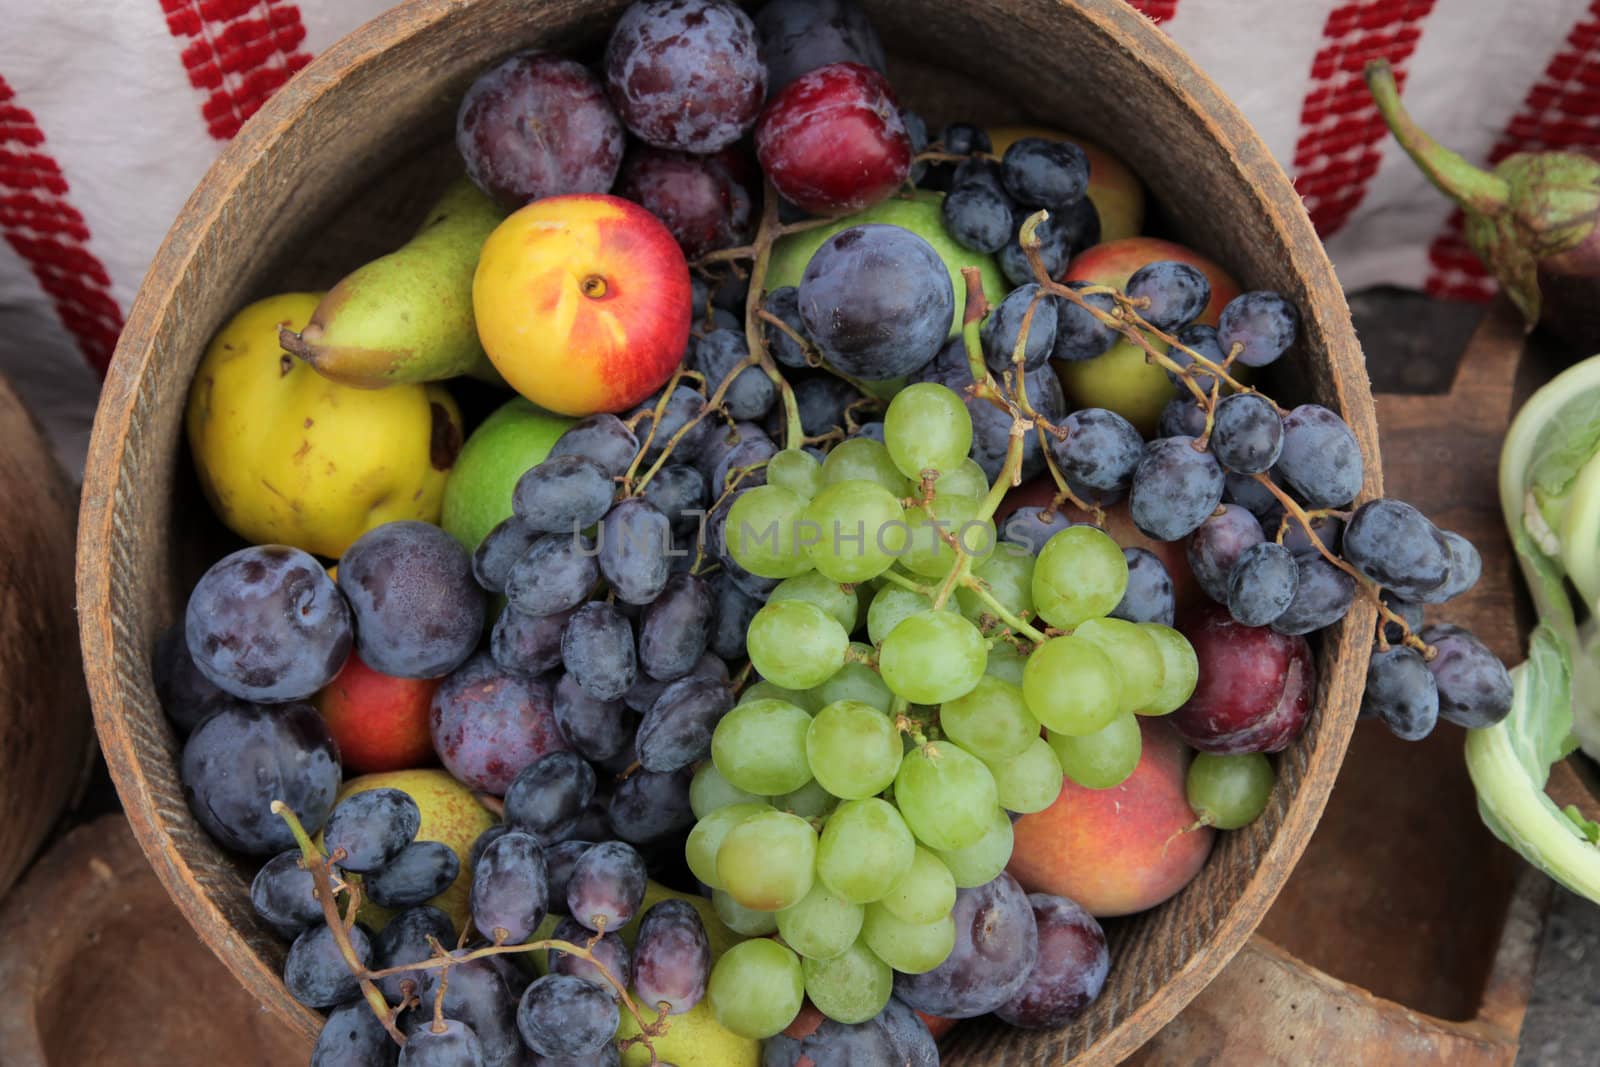 Ripe apples and bunch of grapes